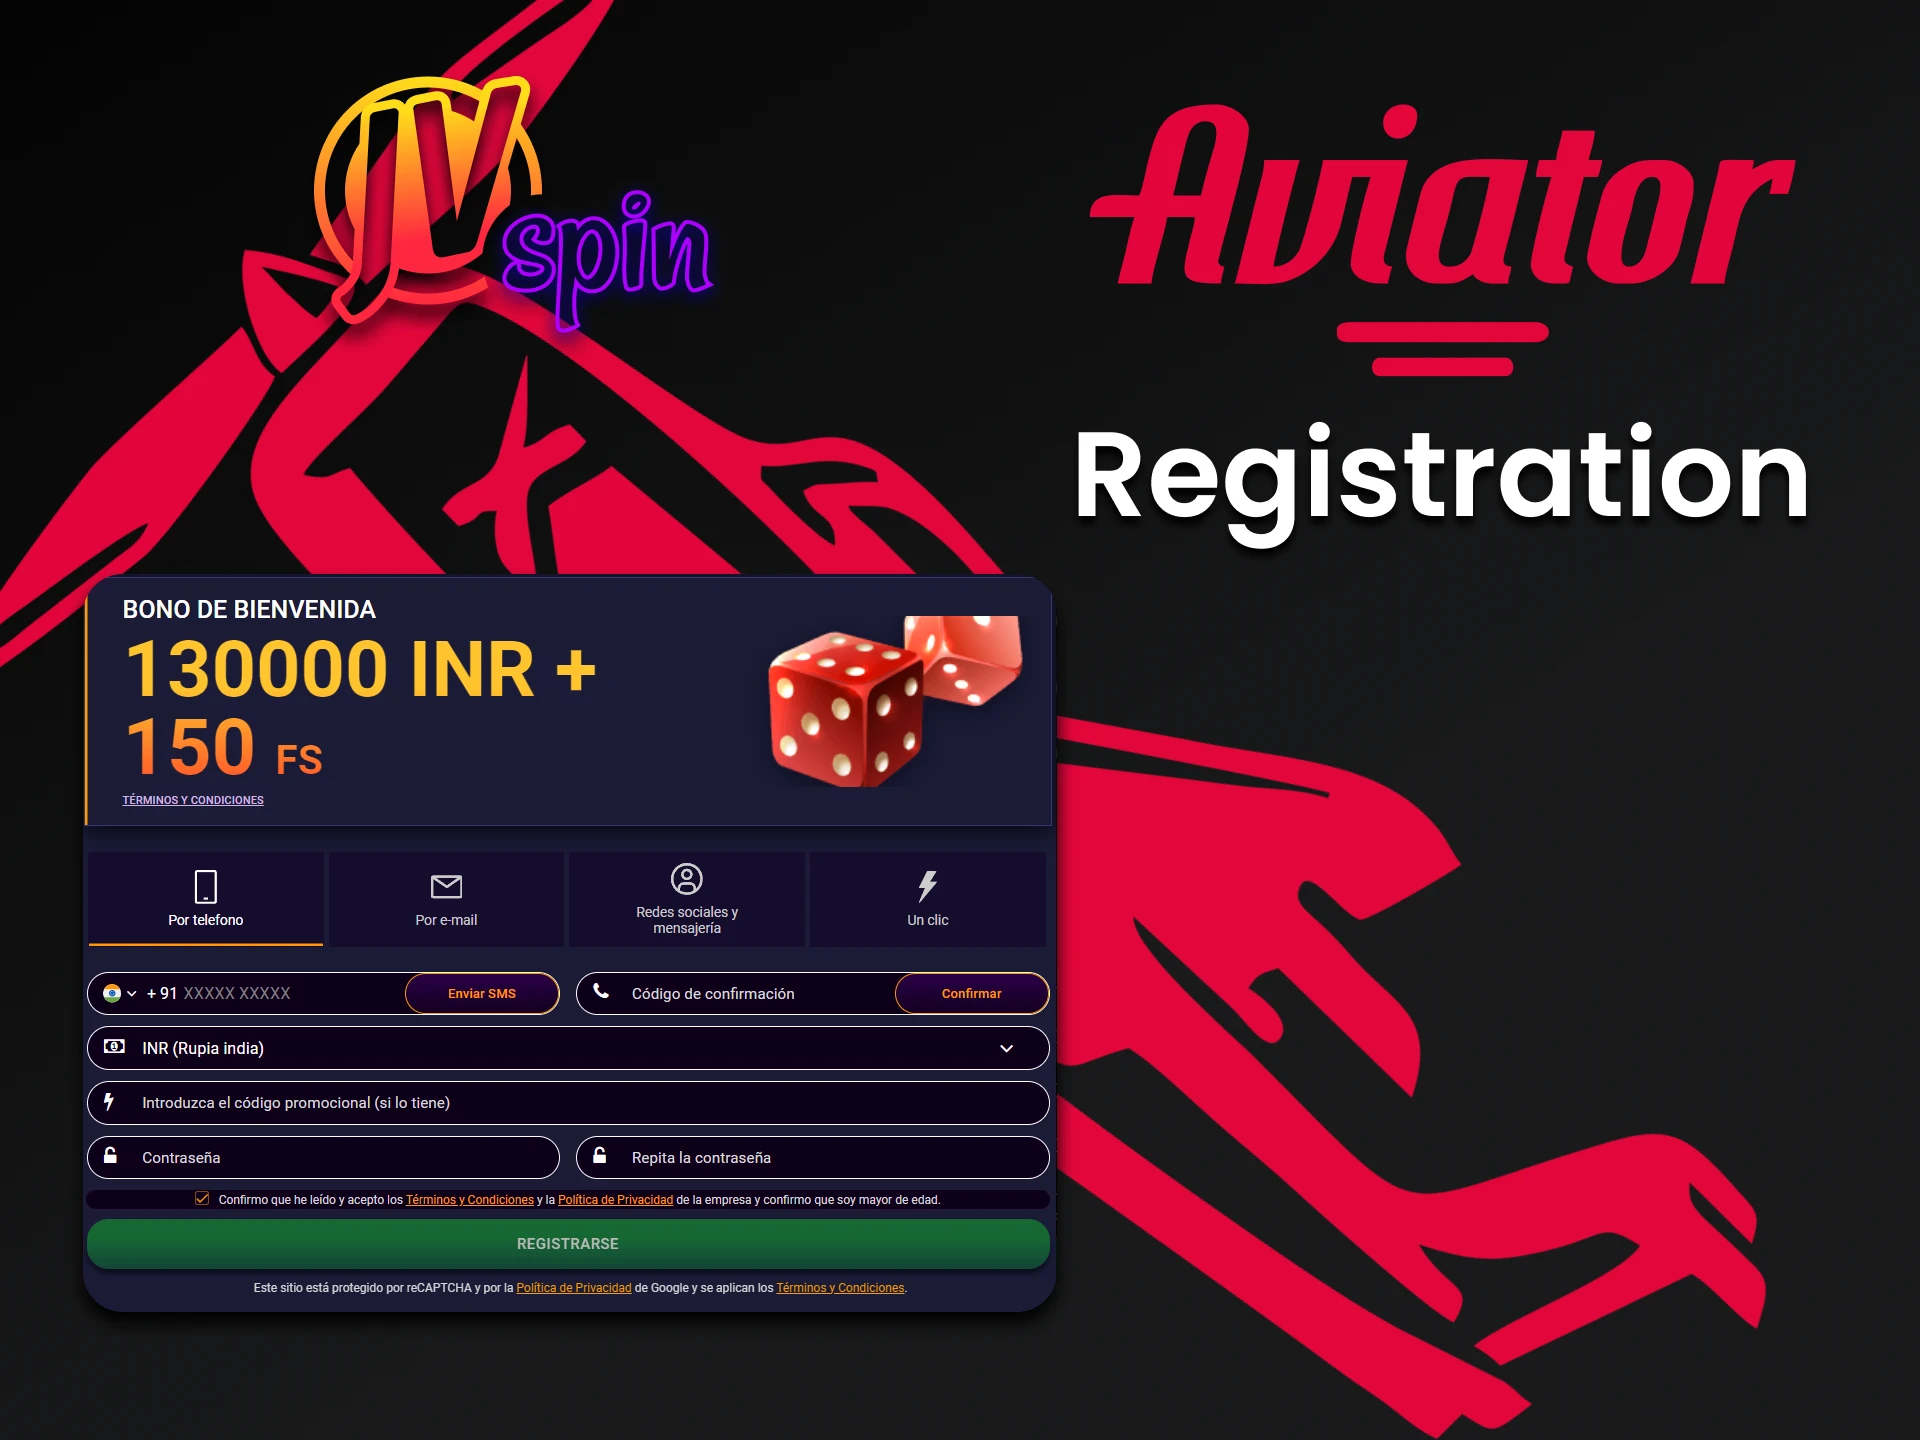 Be sure to register on JV Spin to play Aviator.